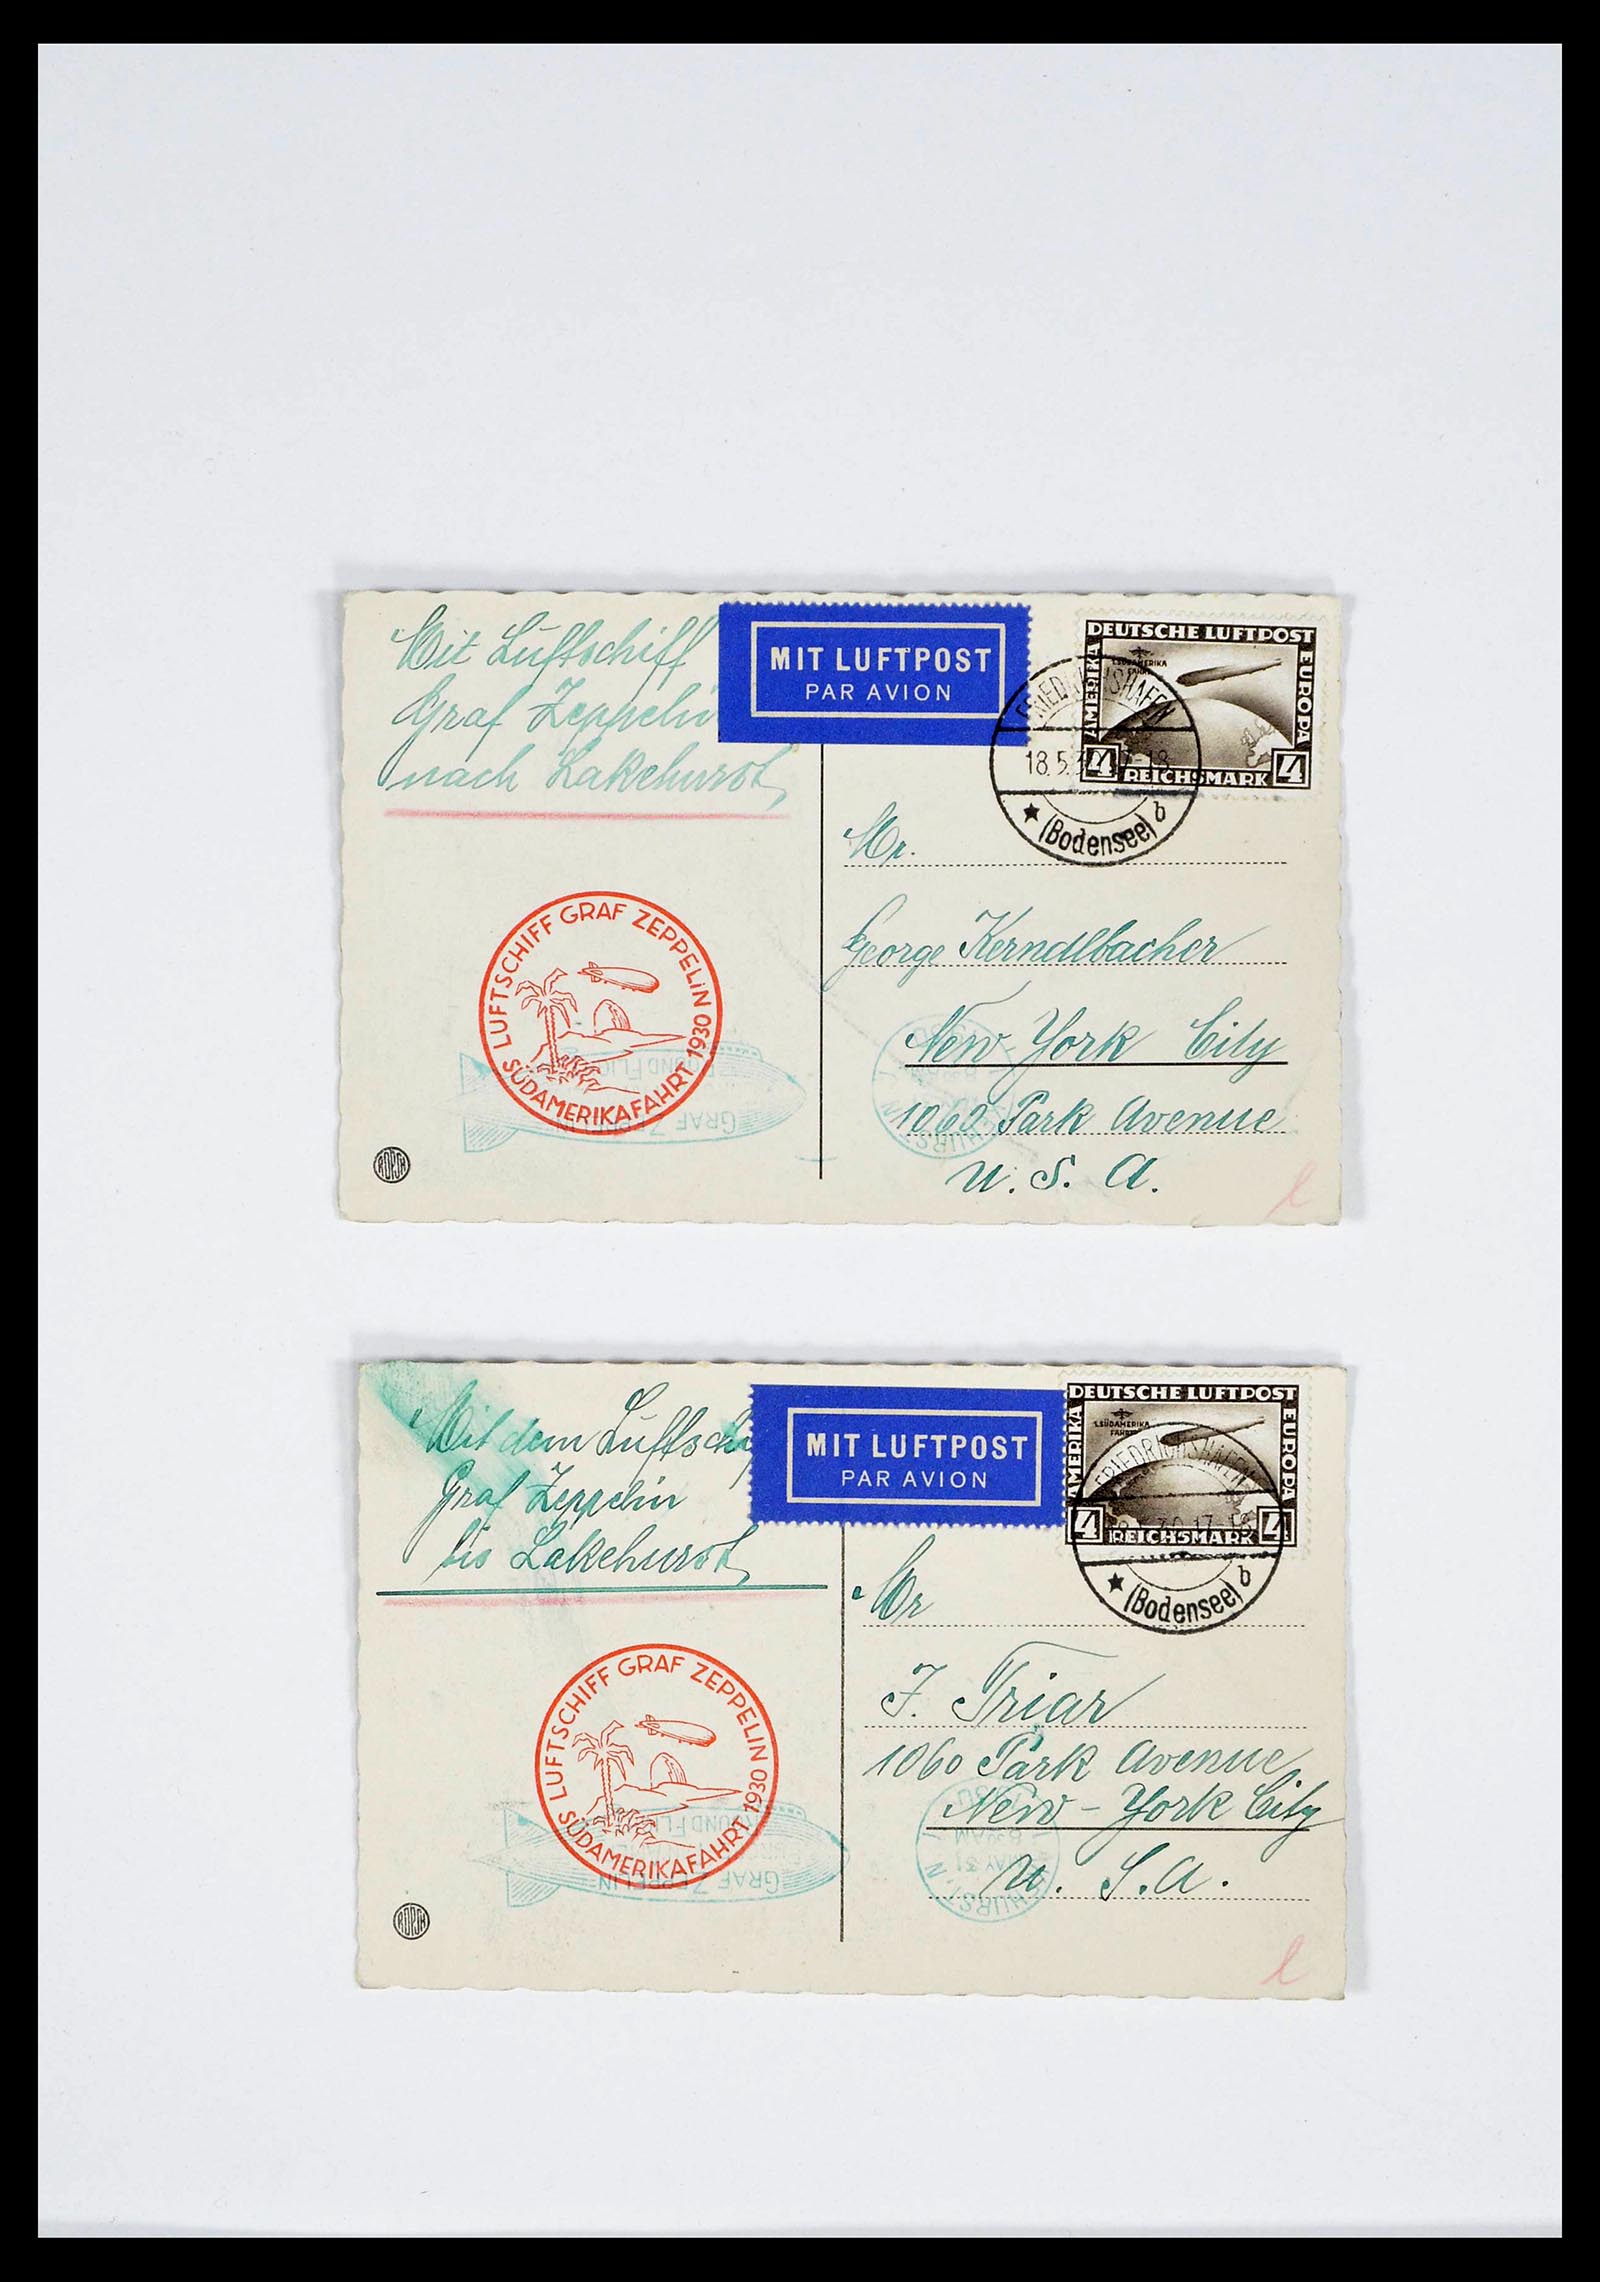 39032 0028 - Stamp collection 39032 Zeppelin covers 1928-1933.